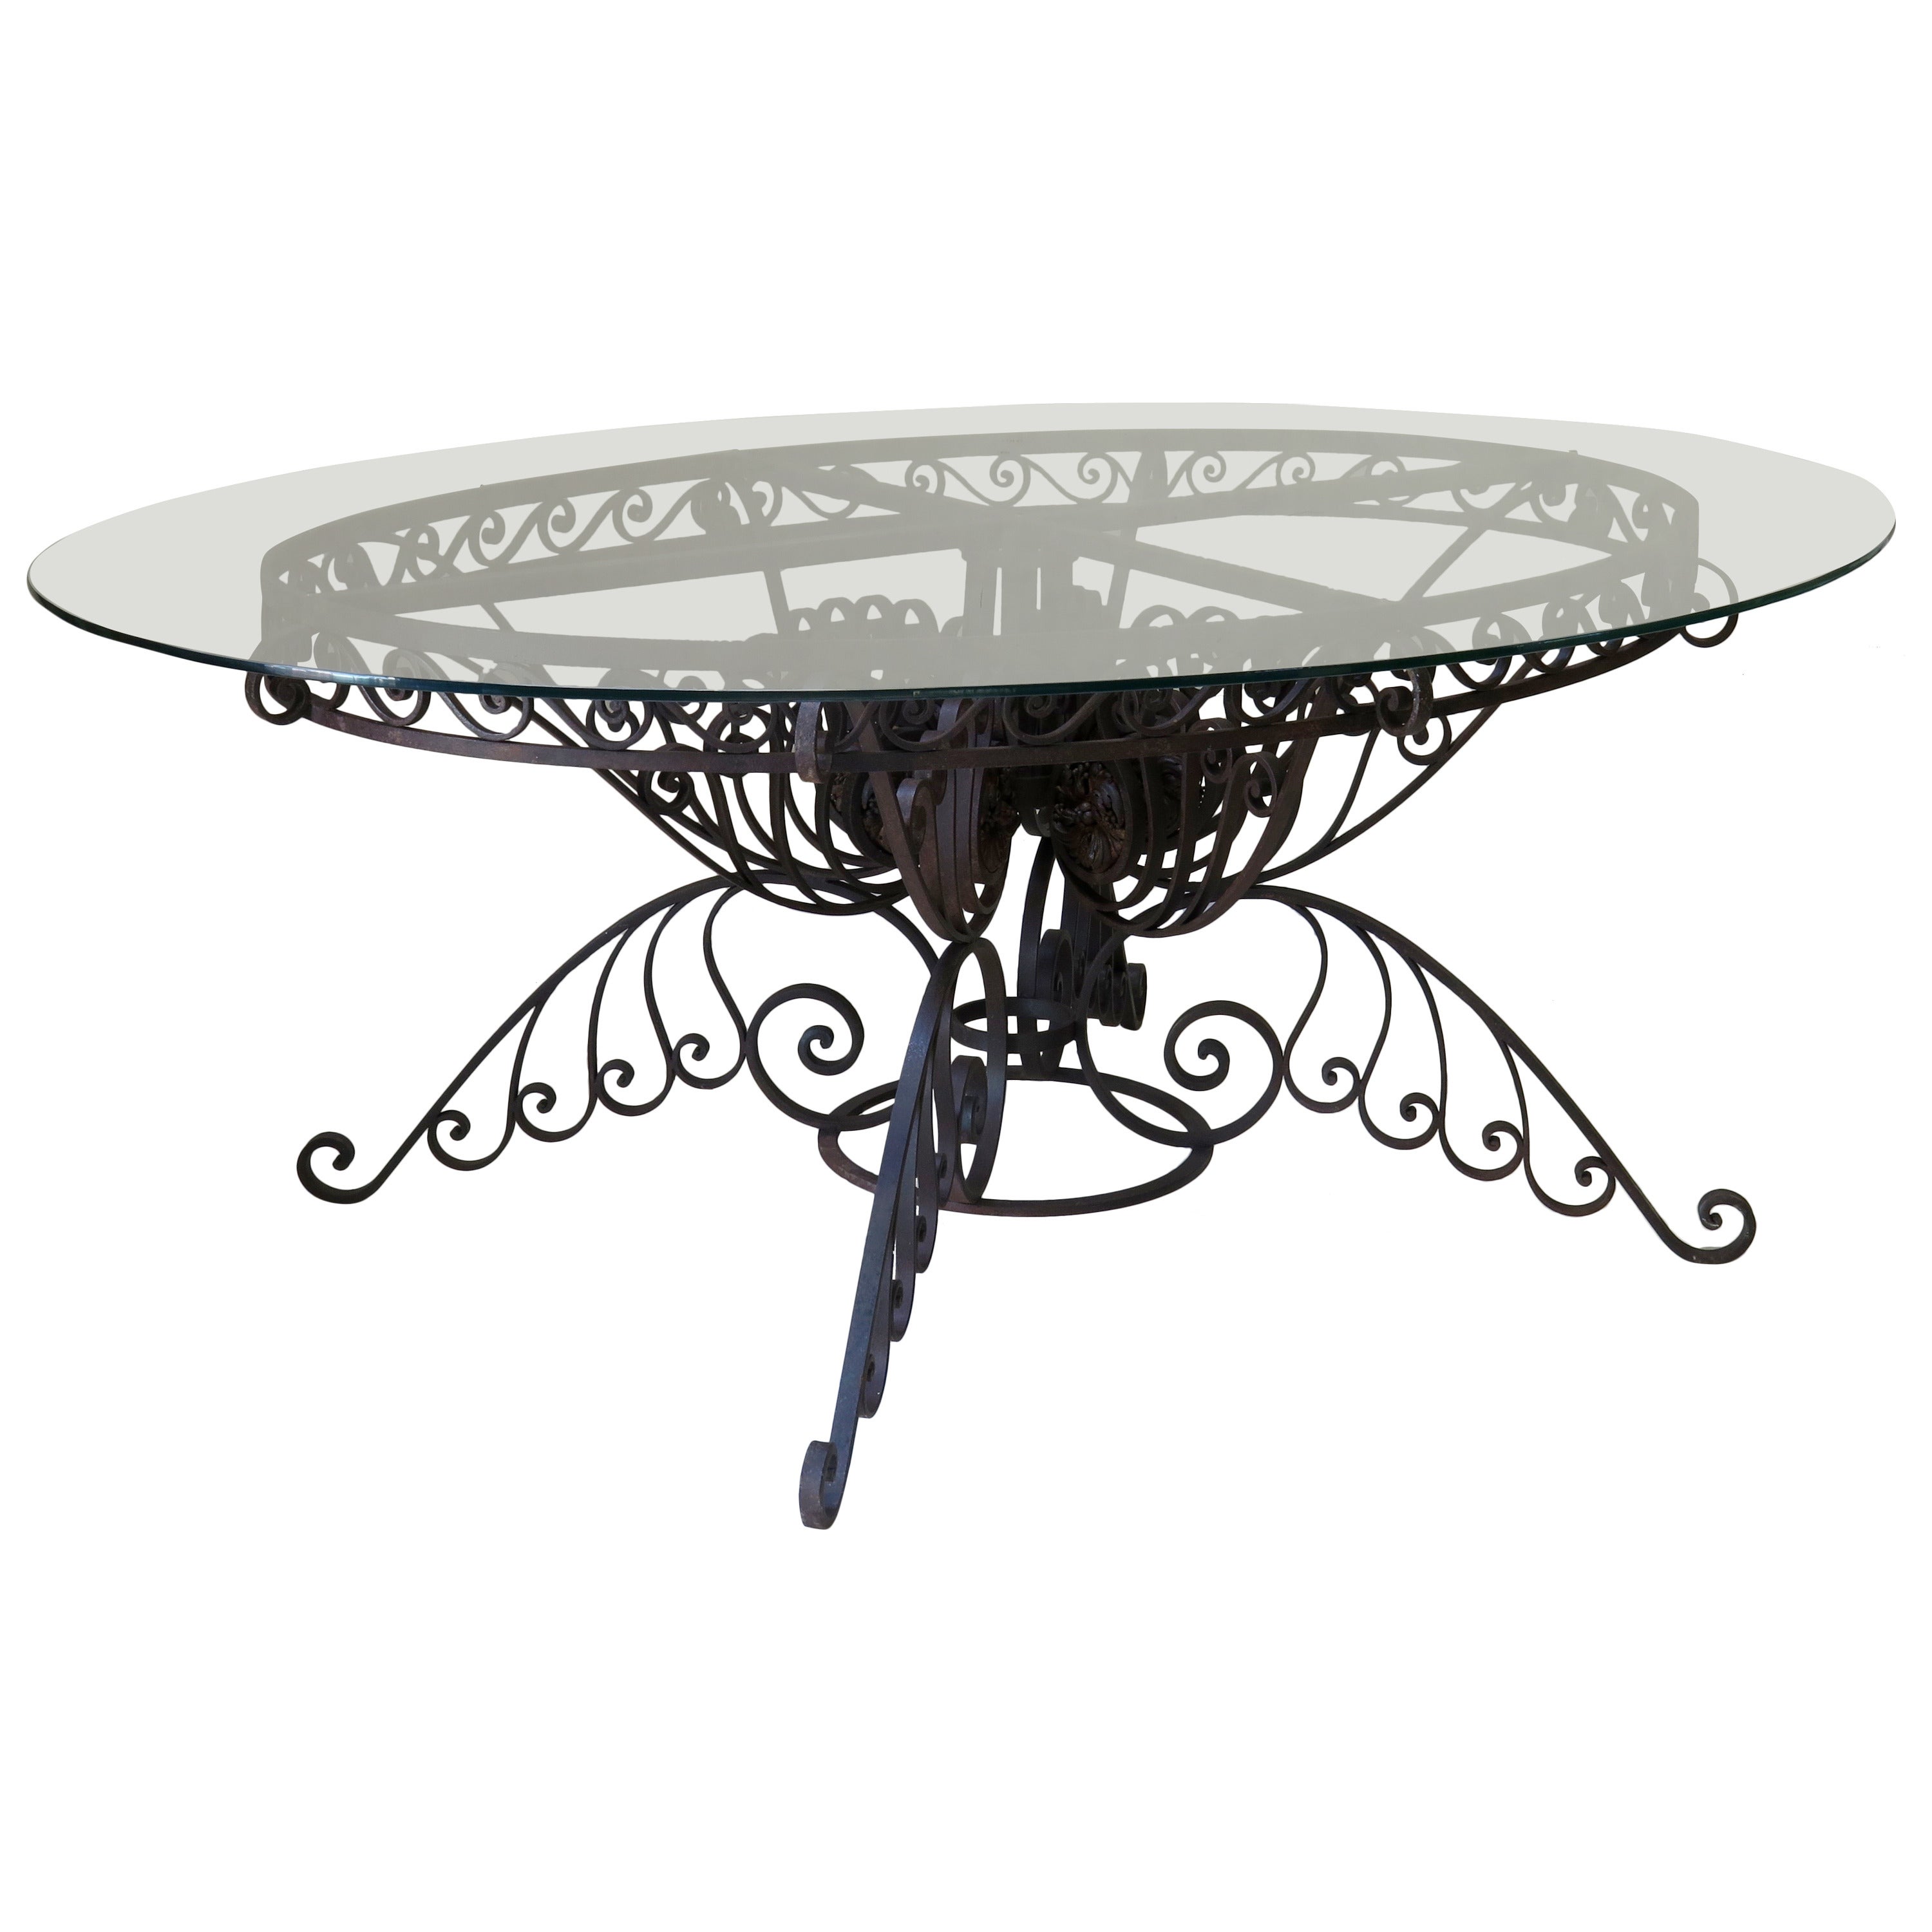 Spectacular Oval Wrought Iron Art Deco Dining Table, France, 1930s For Sale